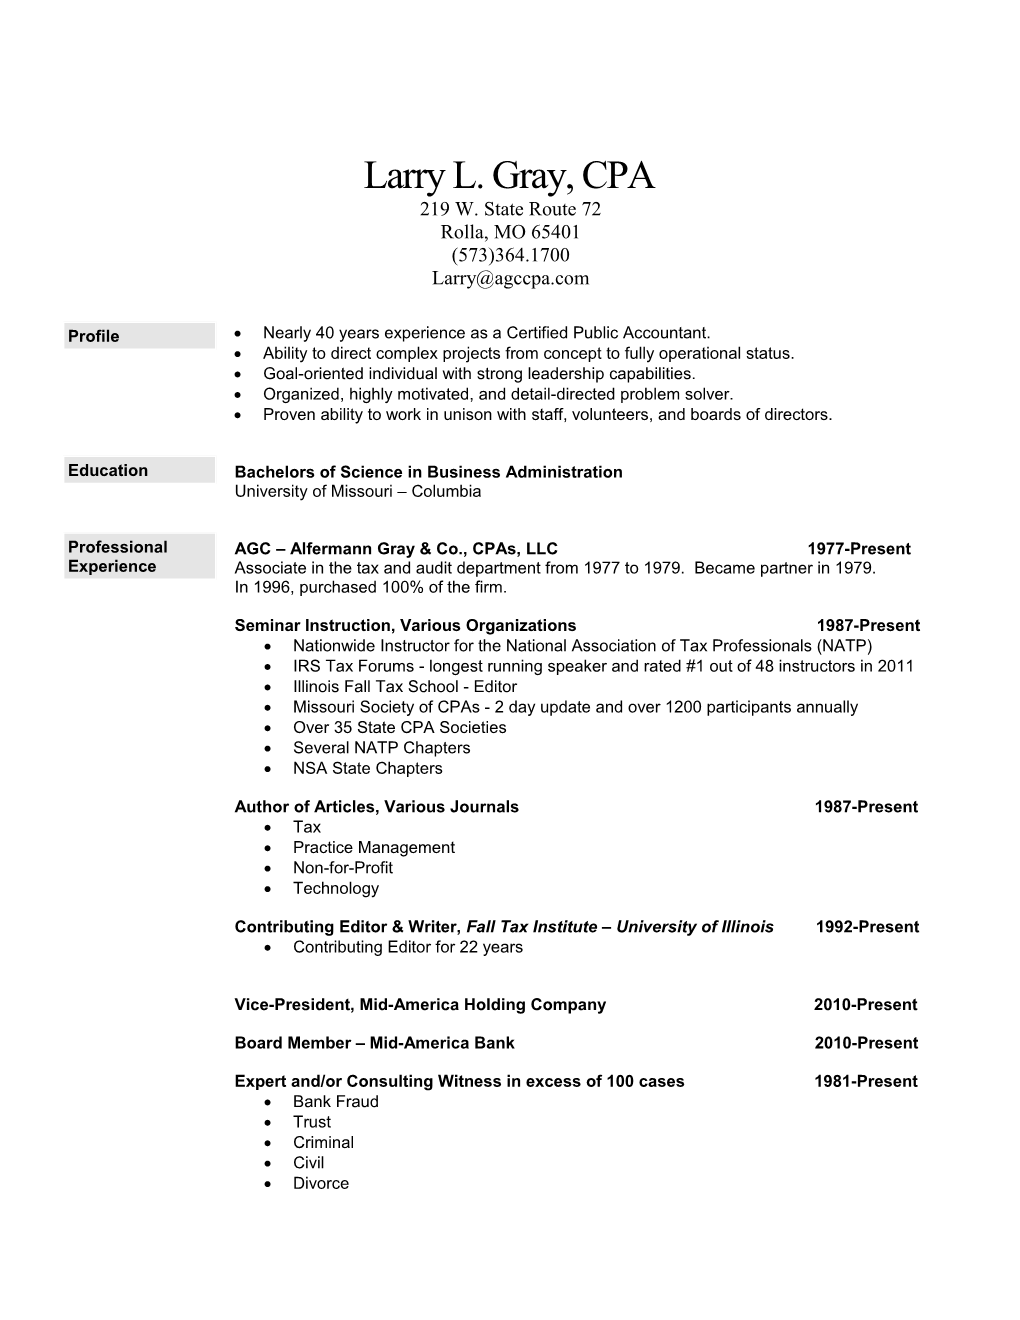 Larry L. Gray, CPA